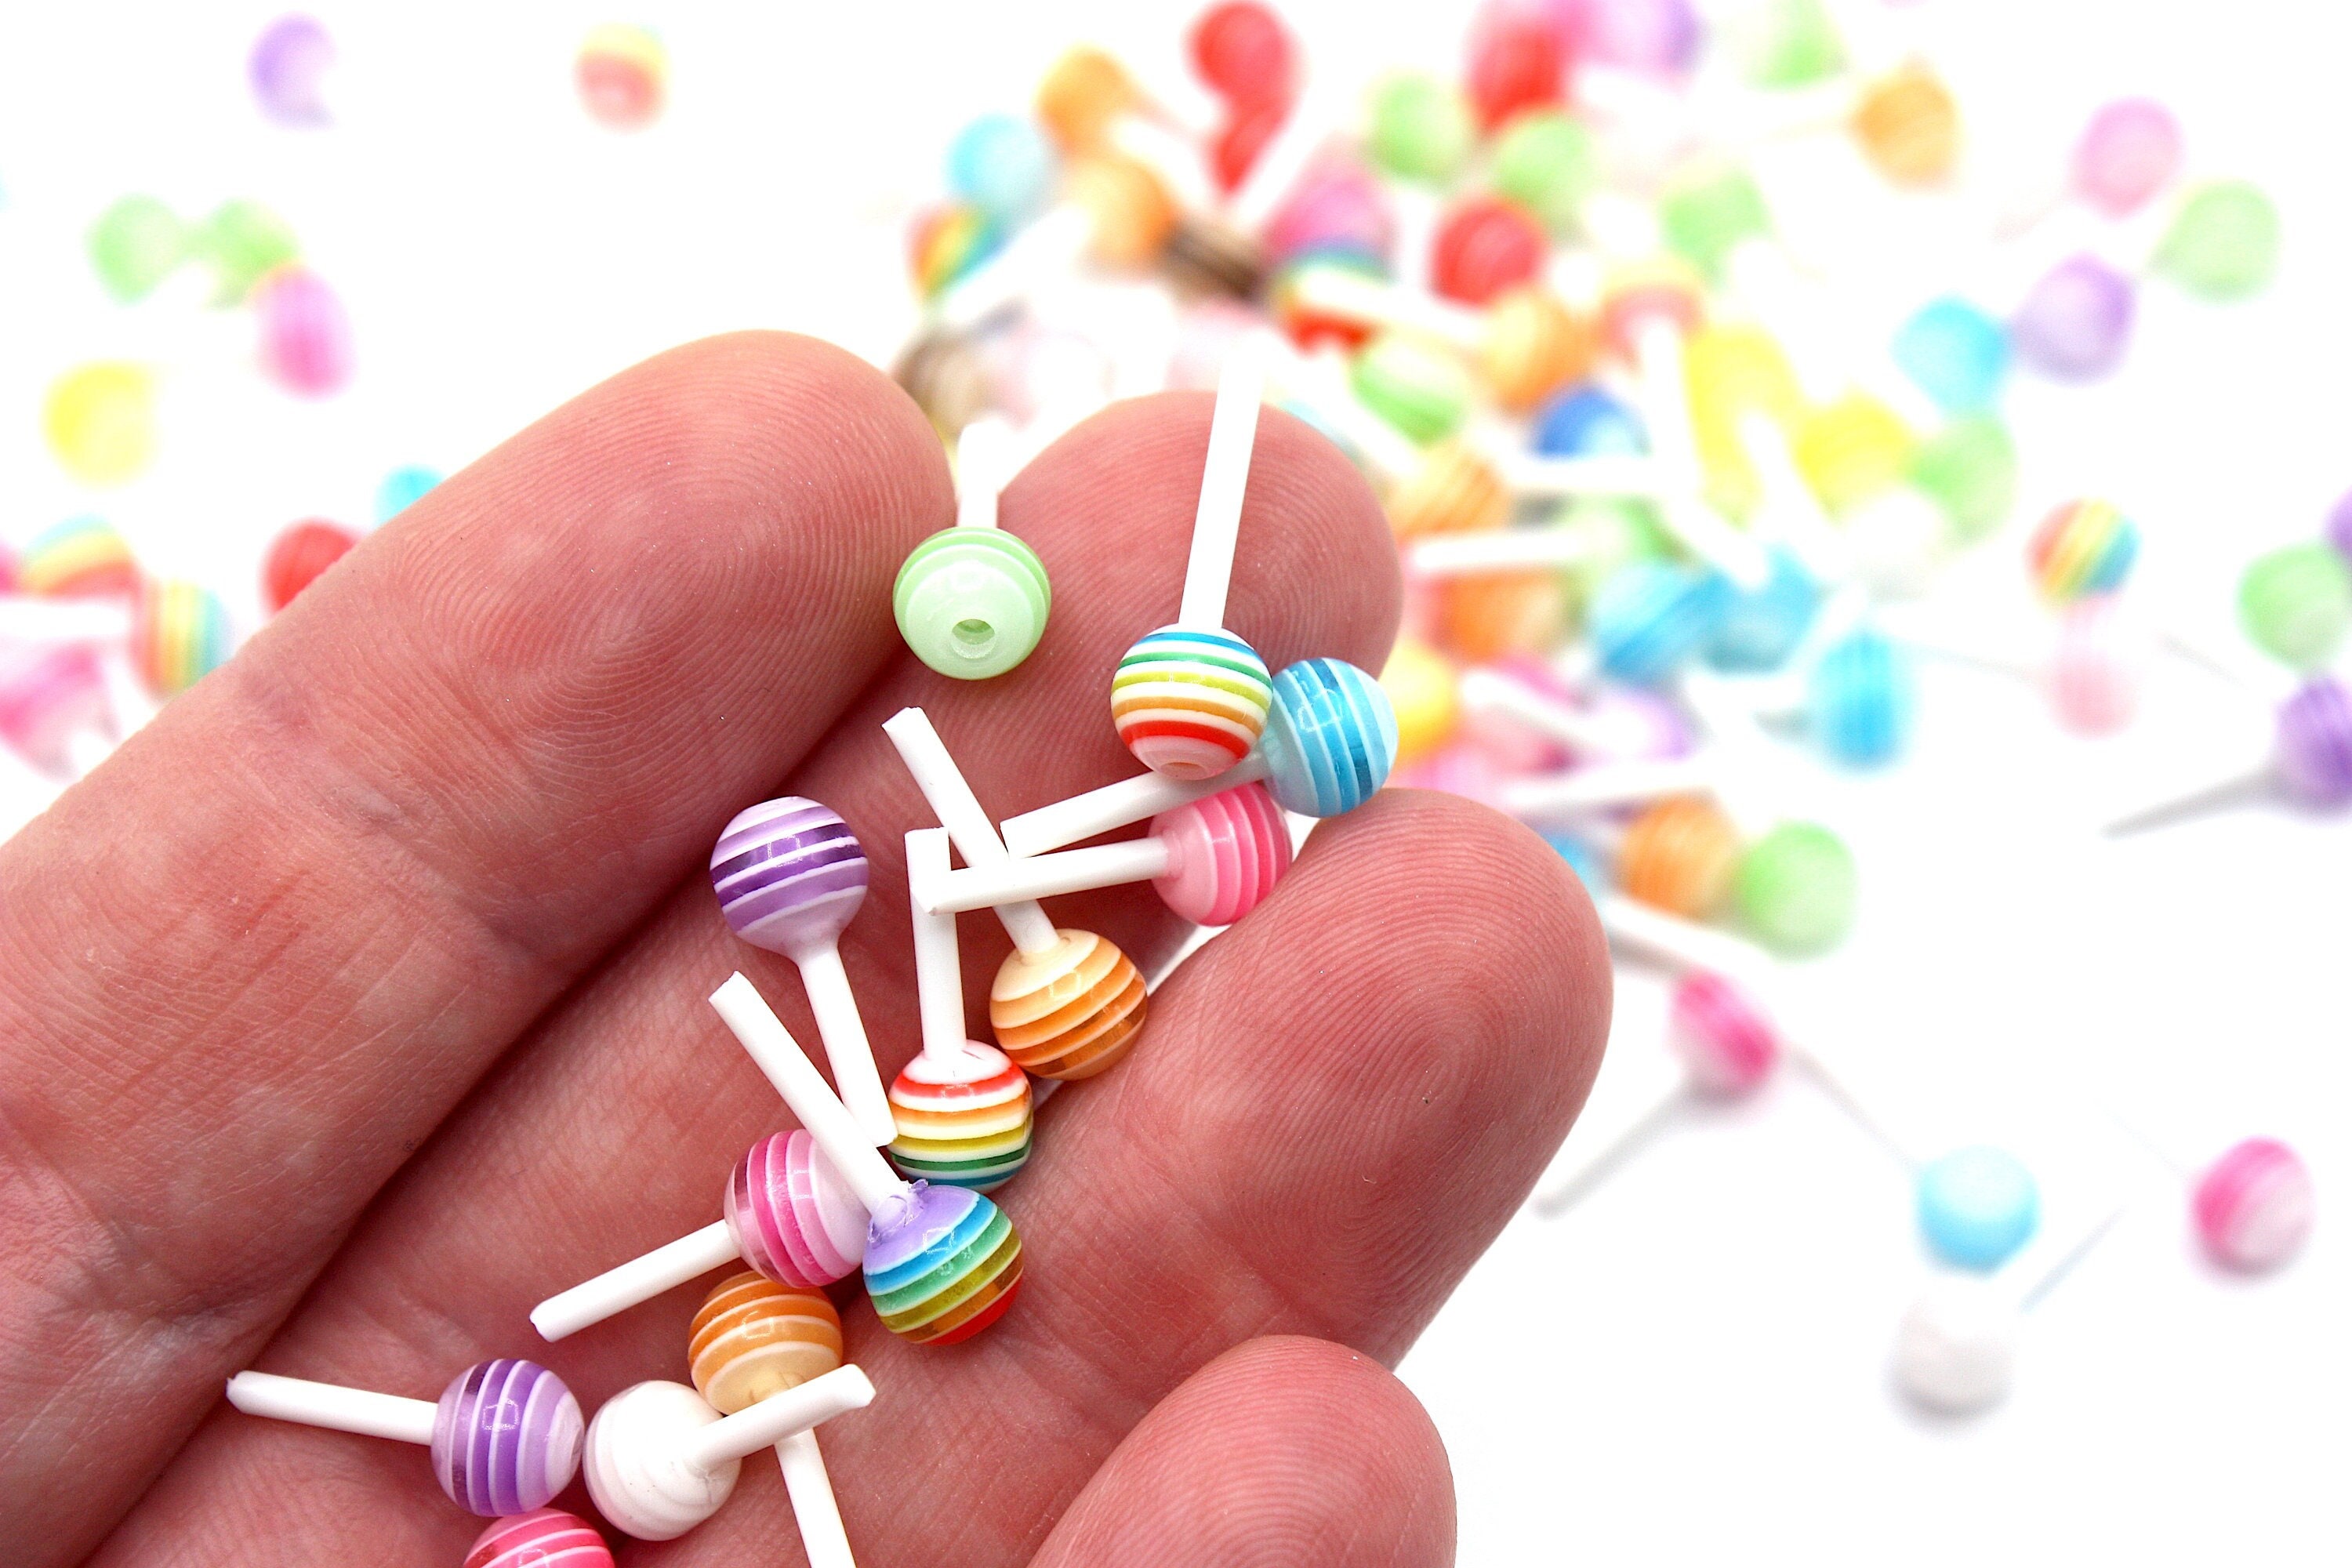 Wuluwala 40pcs Rainbow Lollipop Pop Nail Charms Set,0.2 Colorful Candy Sweets Nail Art 3D AB Crystal Nails Accessories Decoration for Women Girl